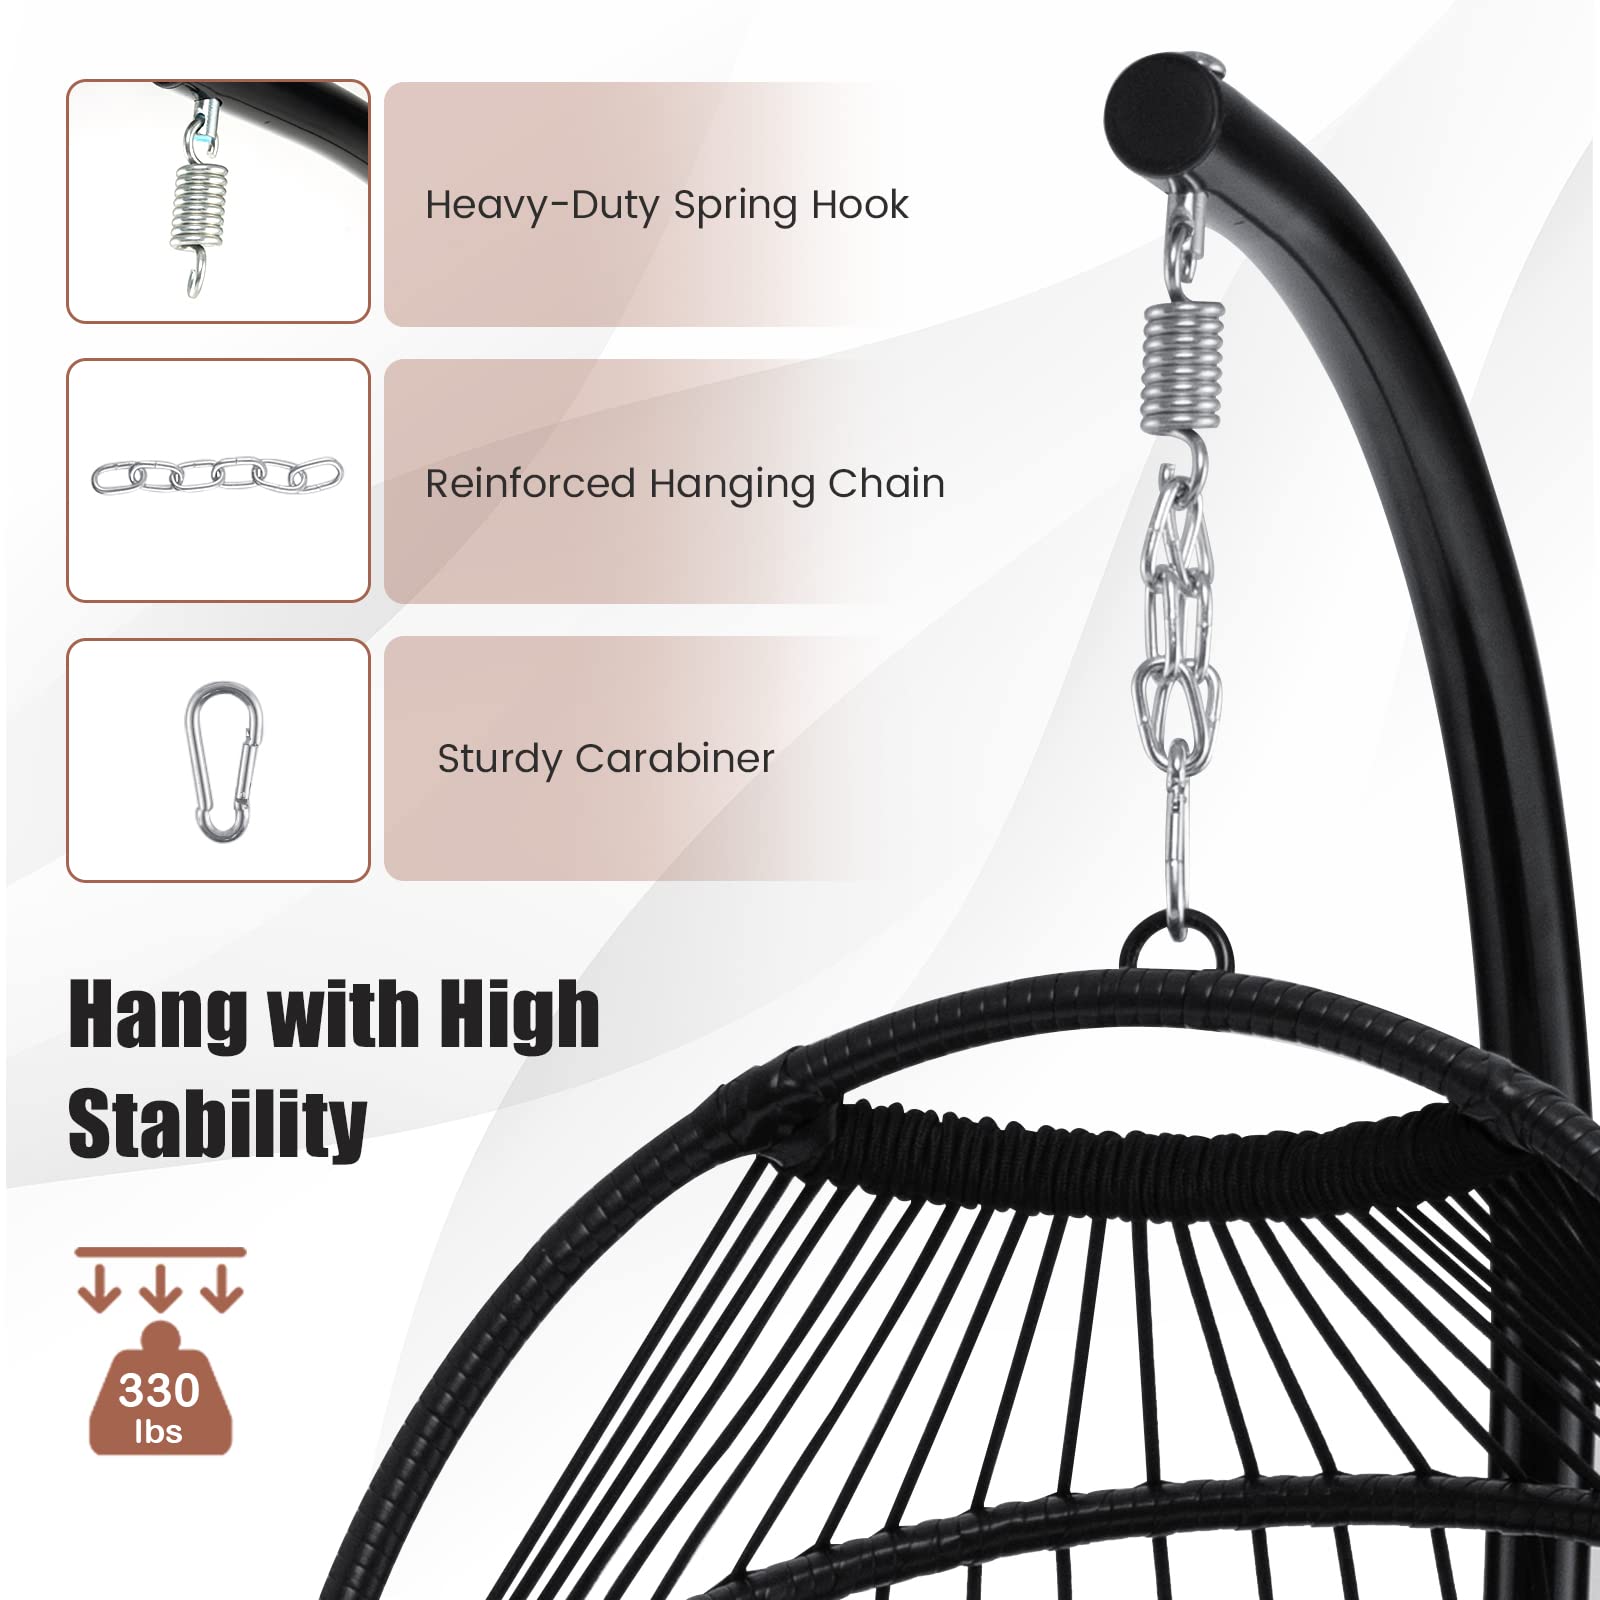 Giantex Egg Chair with Stand, Hanging Basket Chair Hammock Chair w/ Steel Stand Pillow Seat Cushion Rattan Basket & Dust Cover